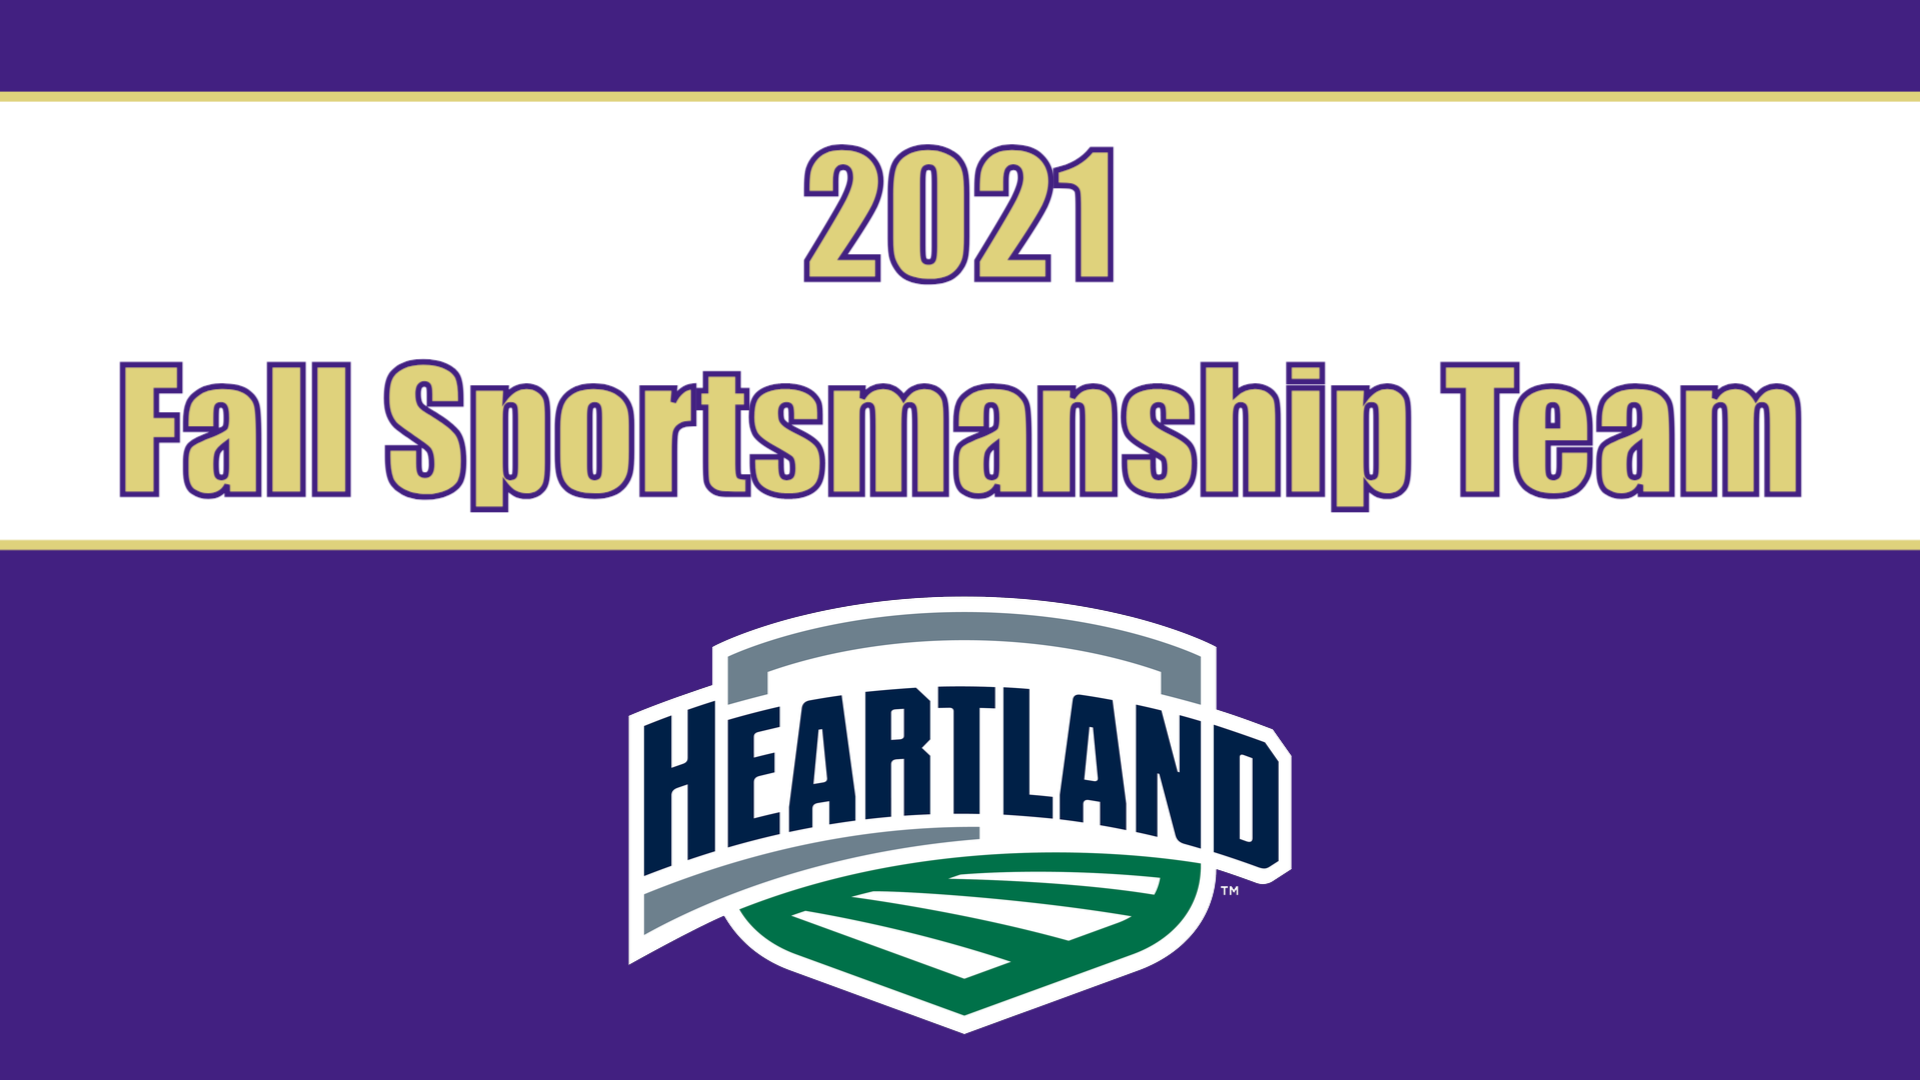 Seven student-athletes named to HCAC All-Sportsmanship teams